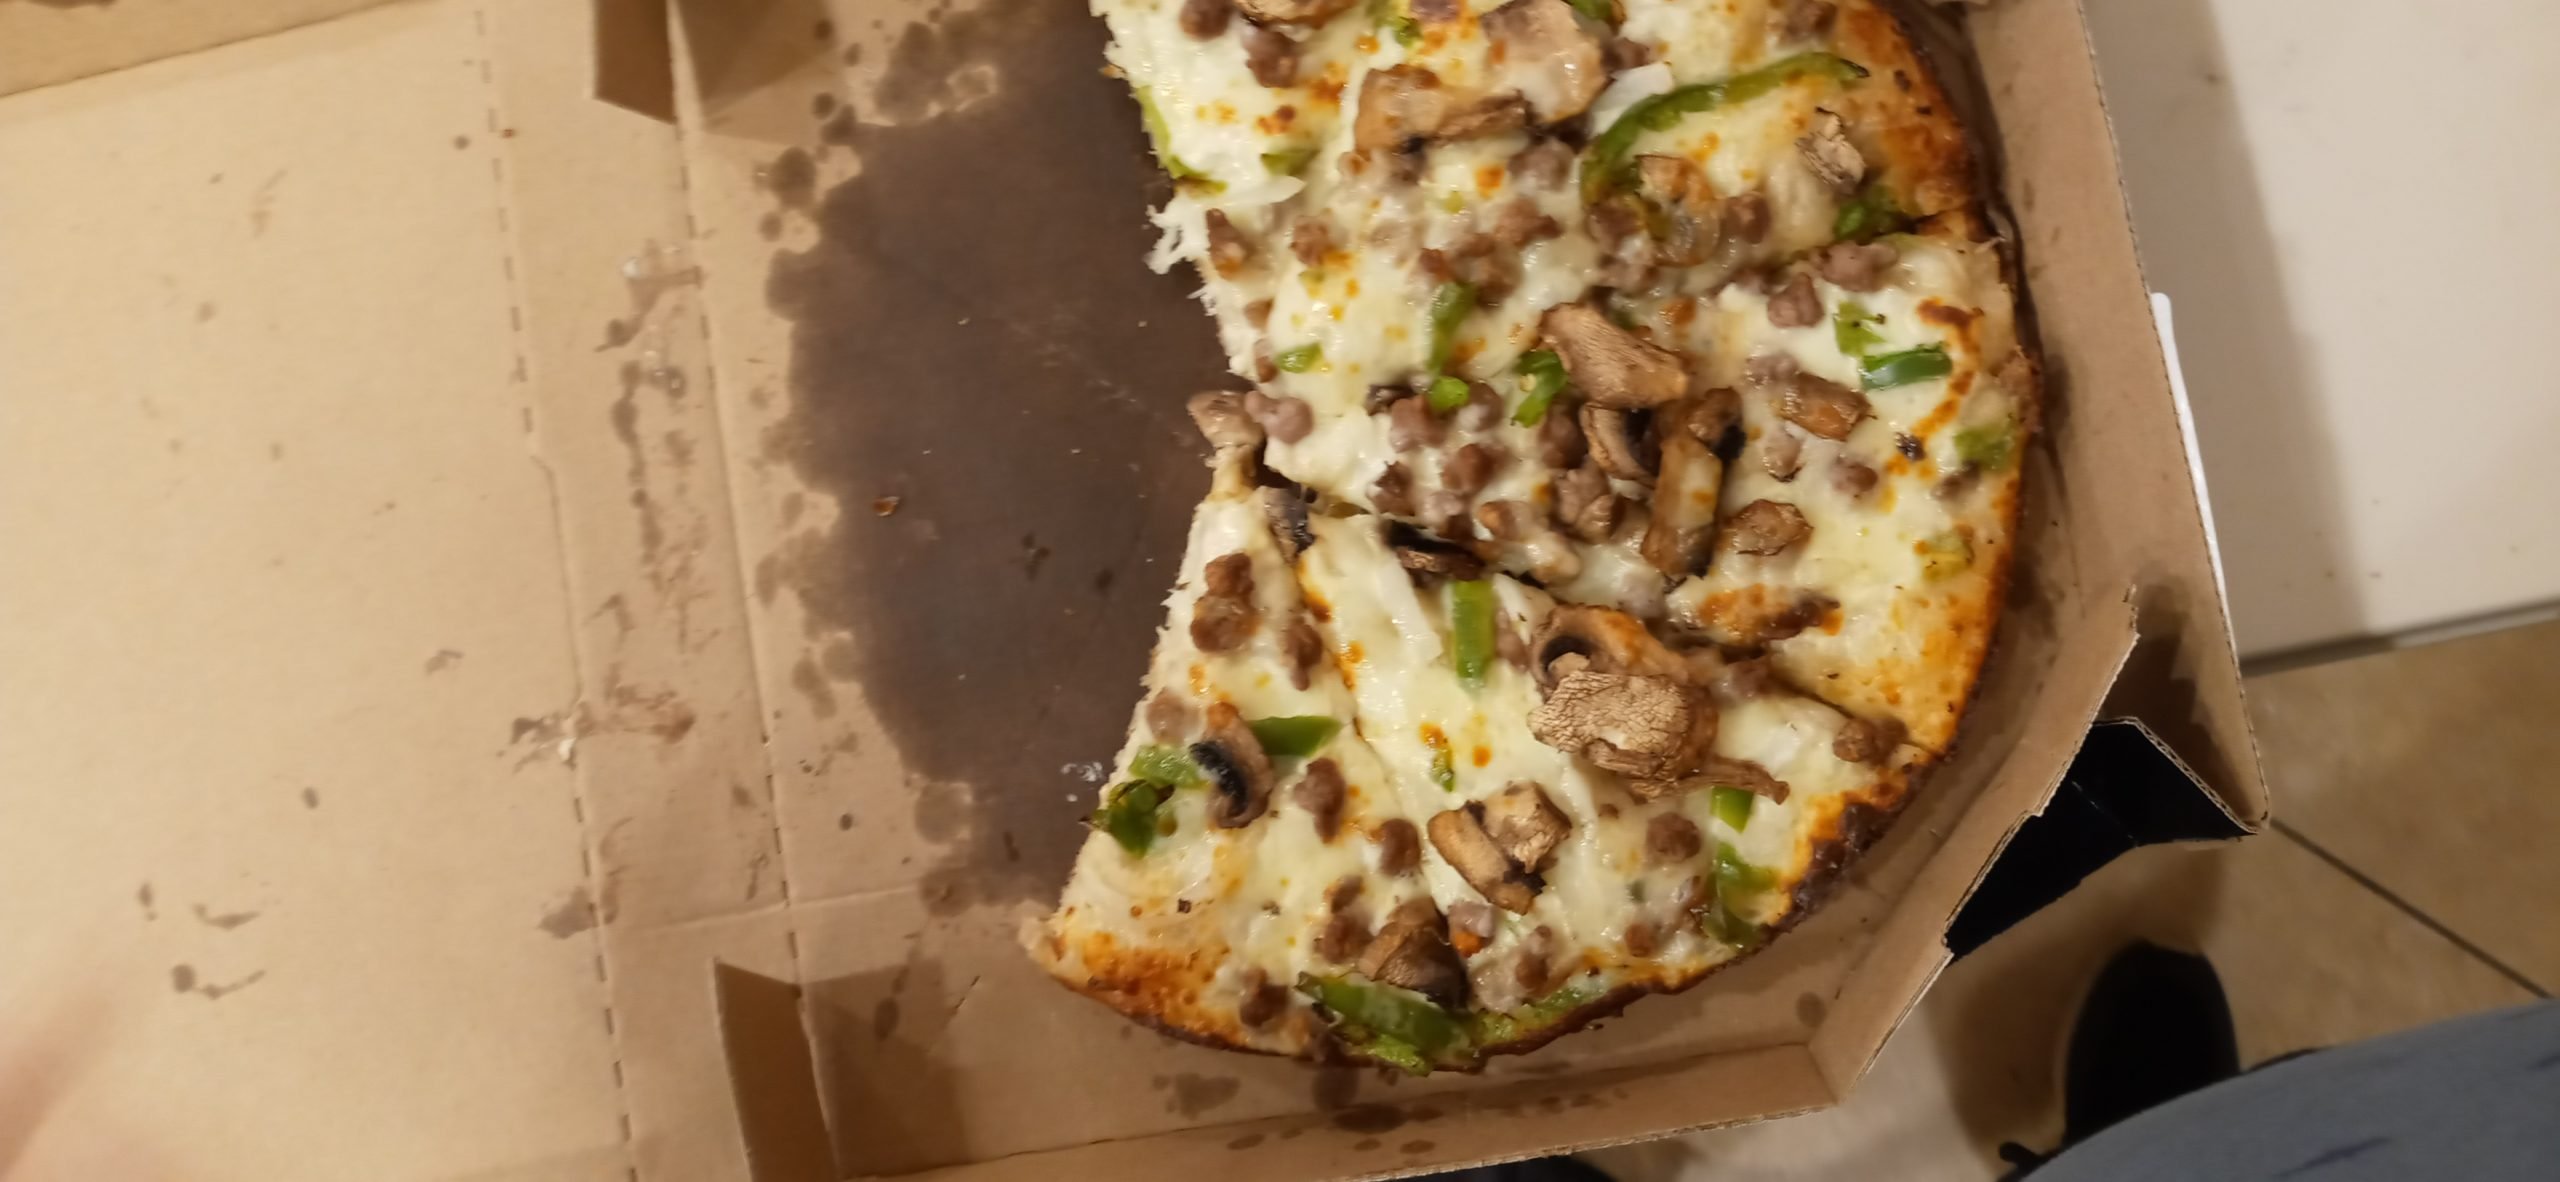 Dominos Pizza complaint Ordered Roast Beef, came with Italian Sausage Intead